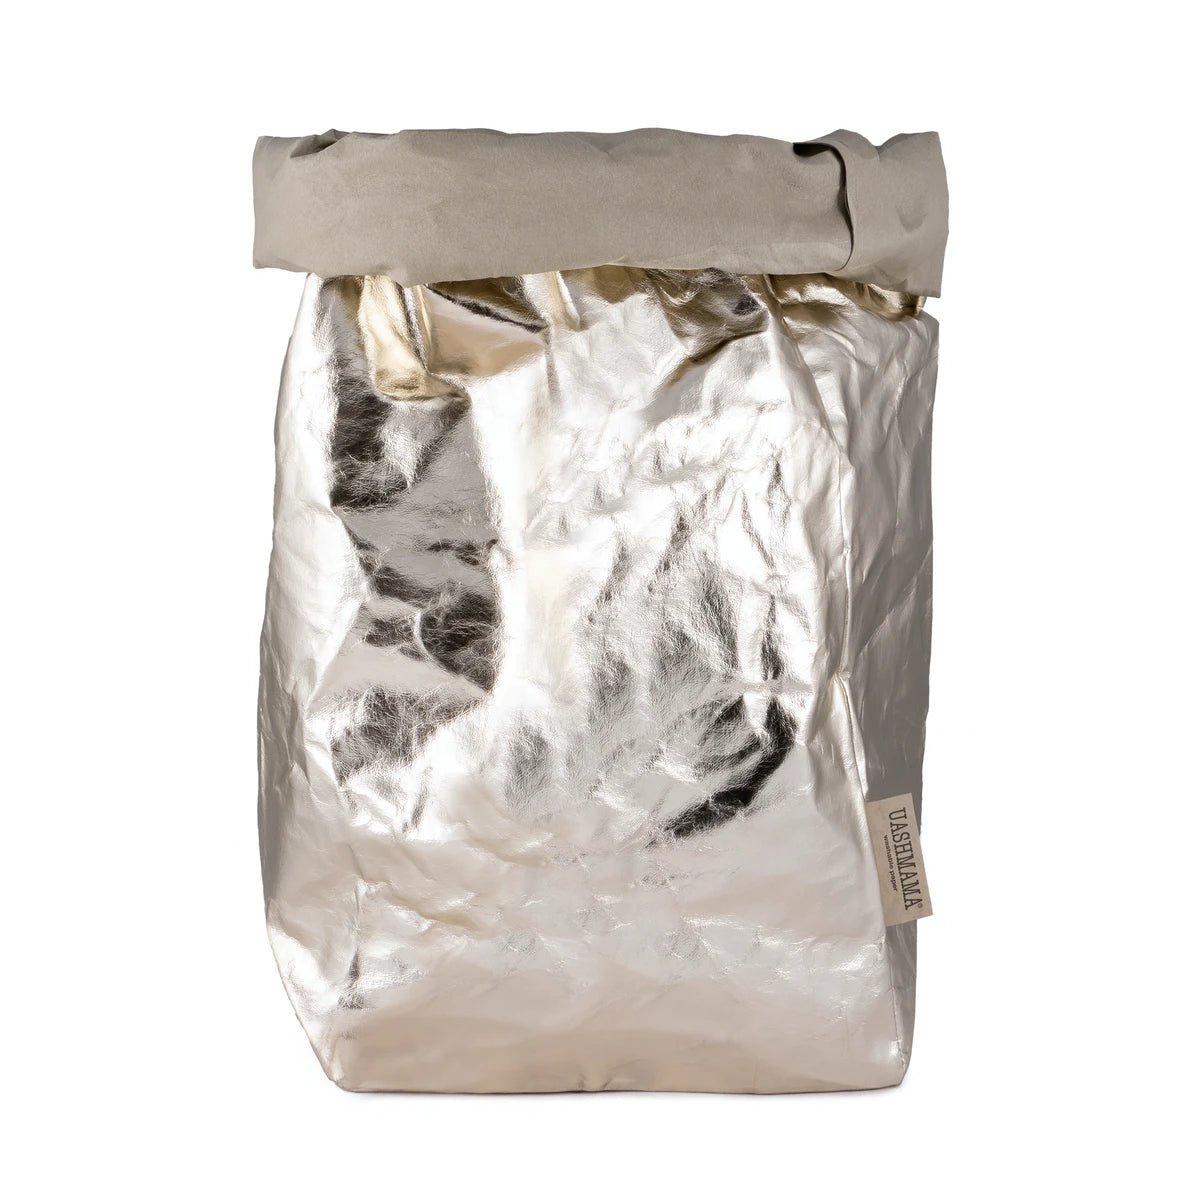 A washable paper bag is shown. The bag is rolled down at the top and features a UASHMAMA logo label on the bottom left corner. The bag pictured is the extra extra large size in metallic platinum.